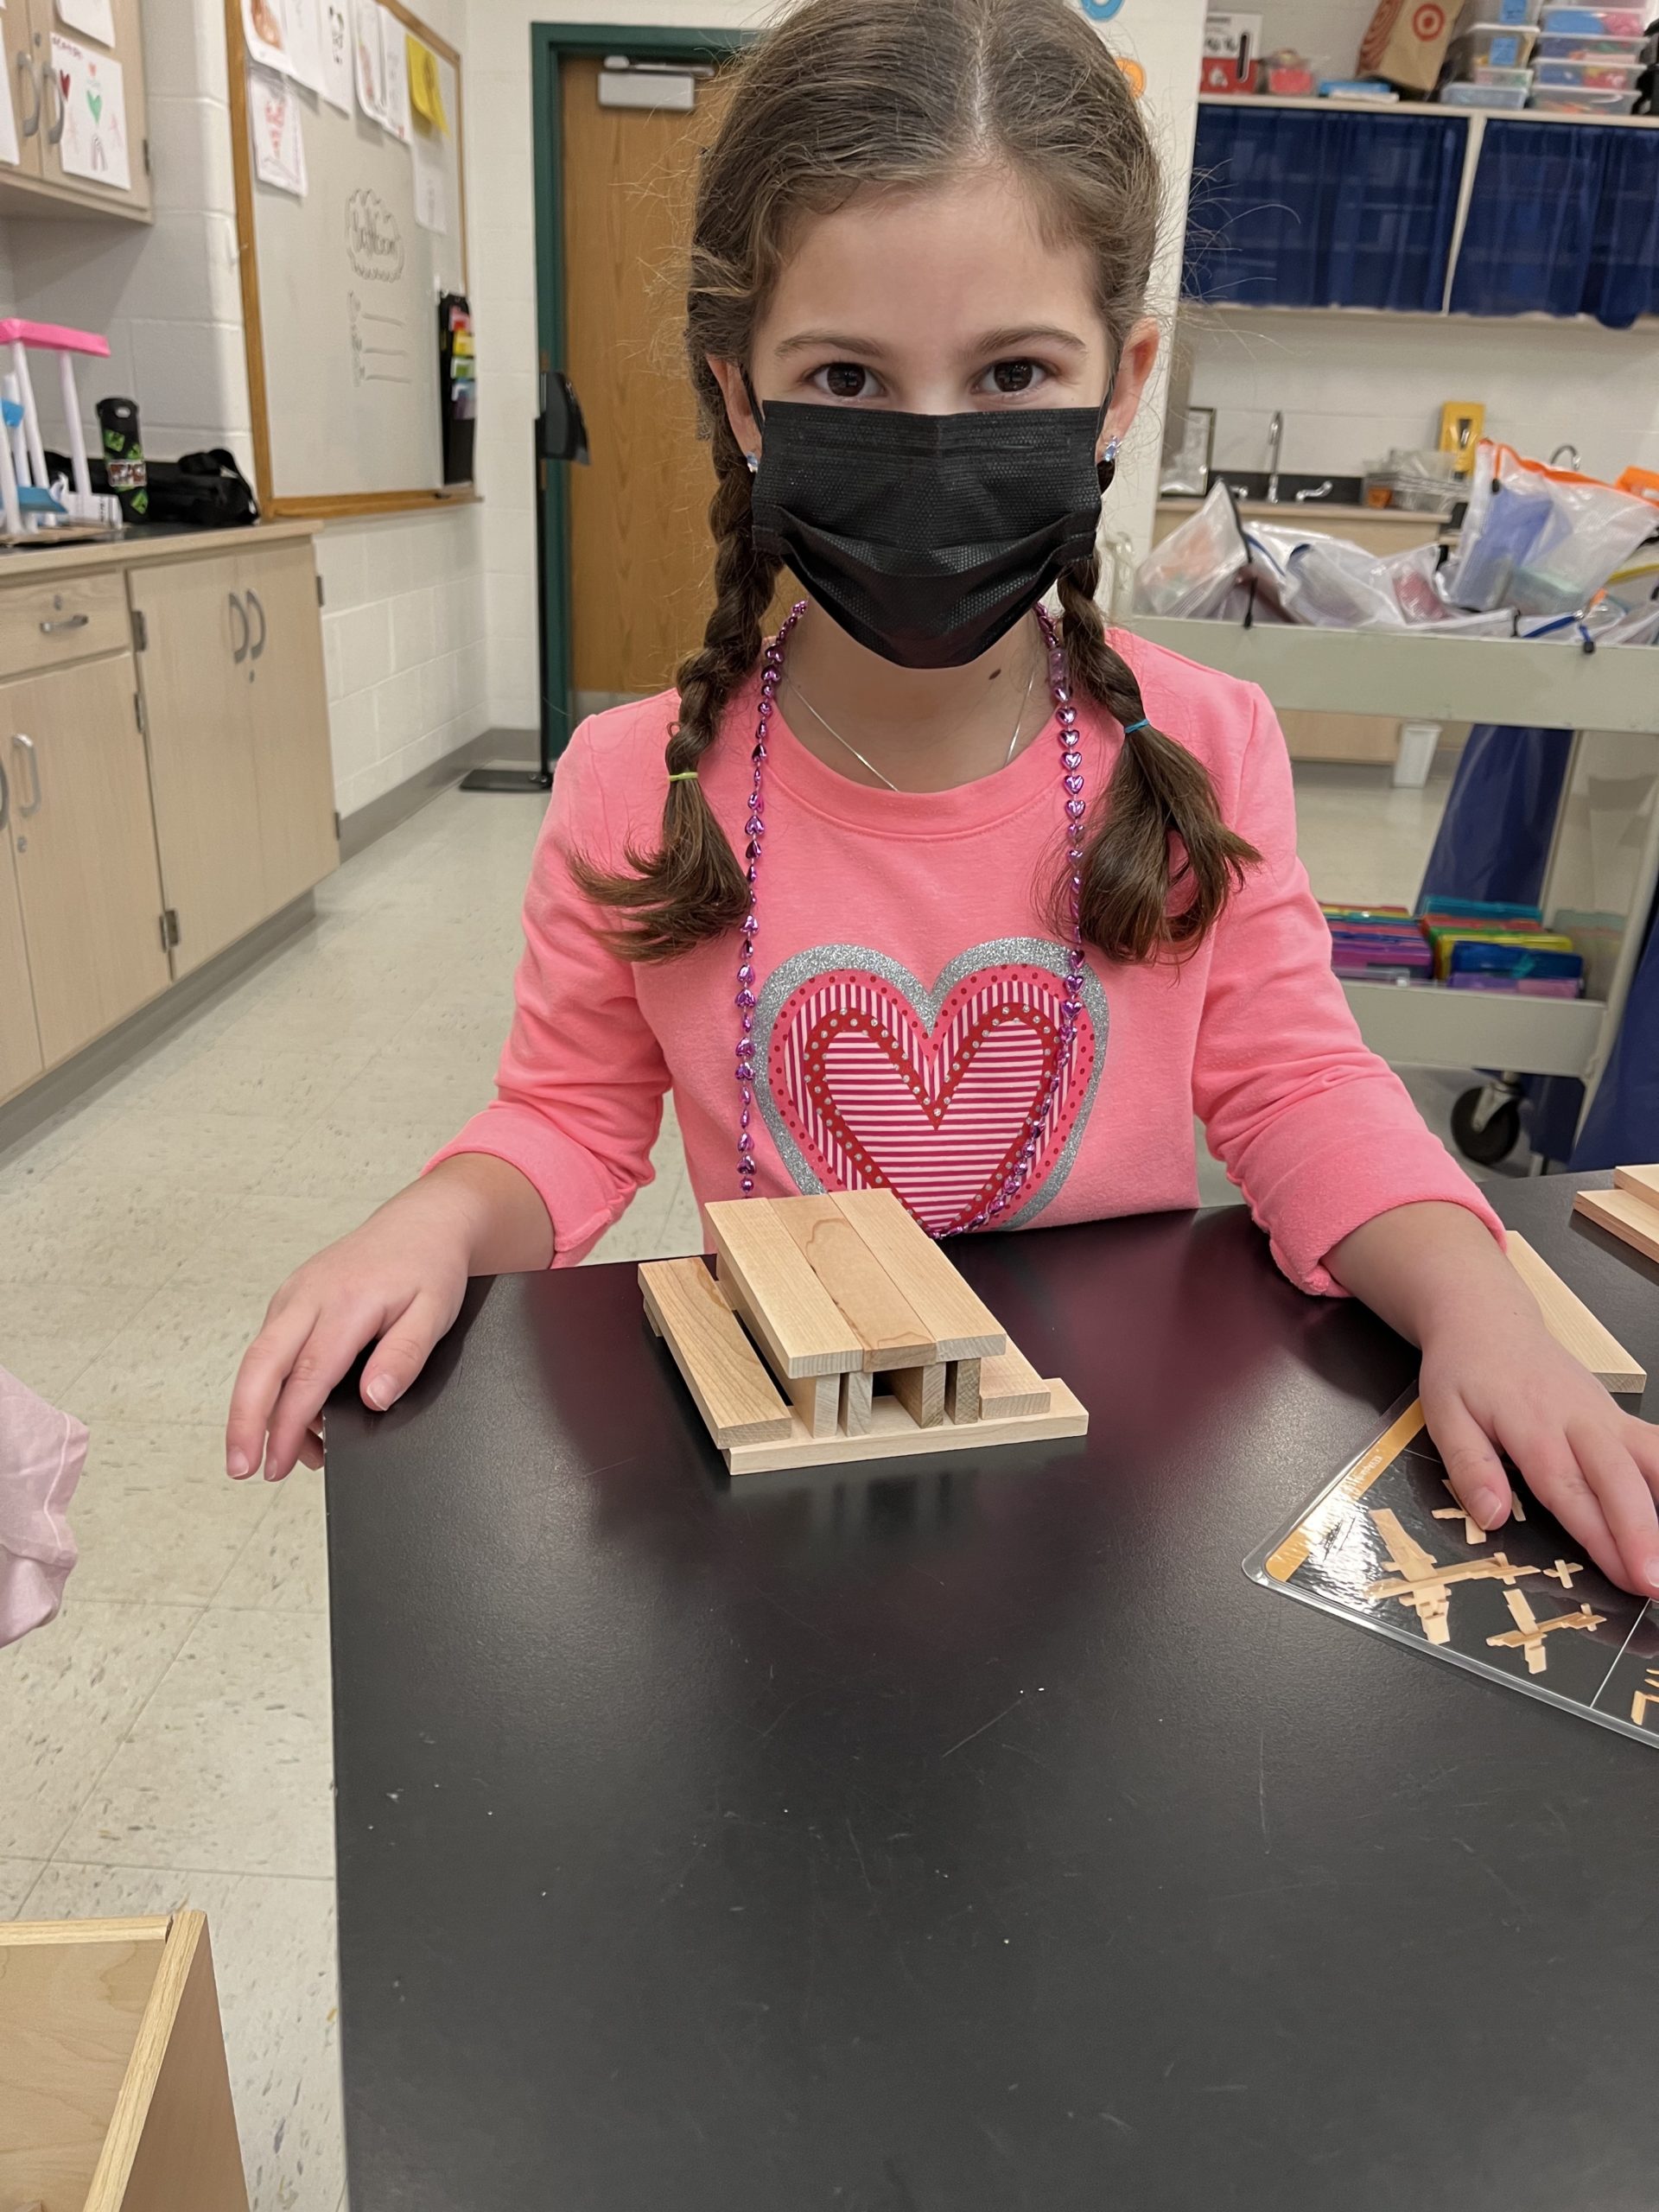 East Quogue Elementary School students have been inventing and engineering with their teacher,  Kelly Hogan,  in the STEAM Lab. Giada Paga shows off the picnic bench she built using Keva planks.